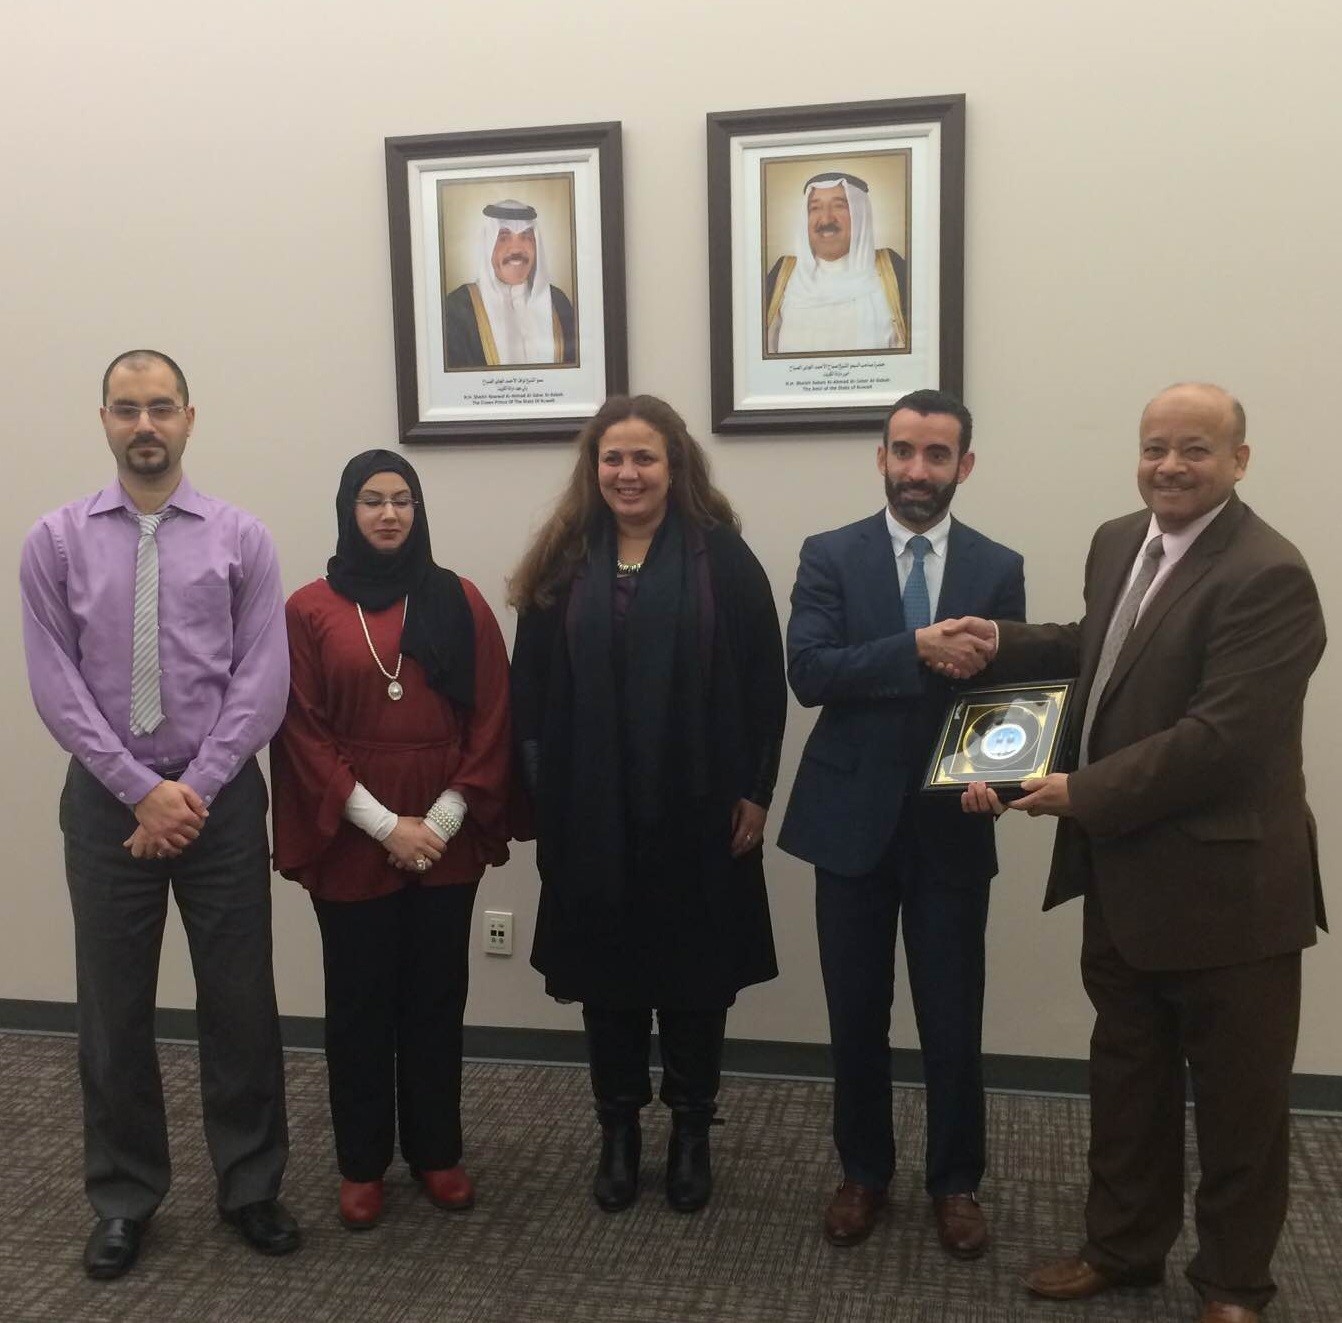 Head of Kuwait Cultural Office in Canada Dr. Fahad Al-Nasser with officials from York University in Toronto